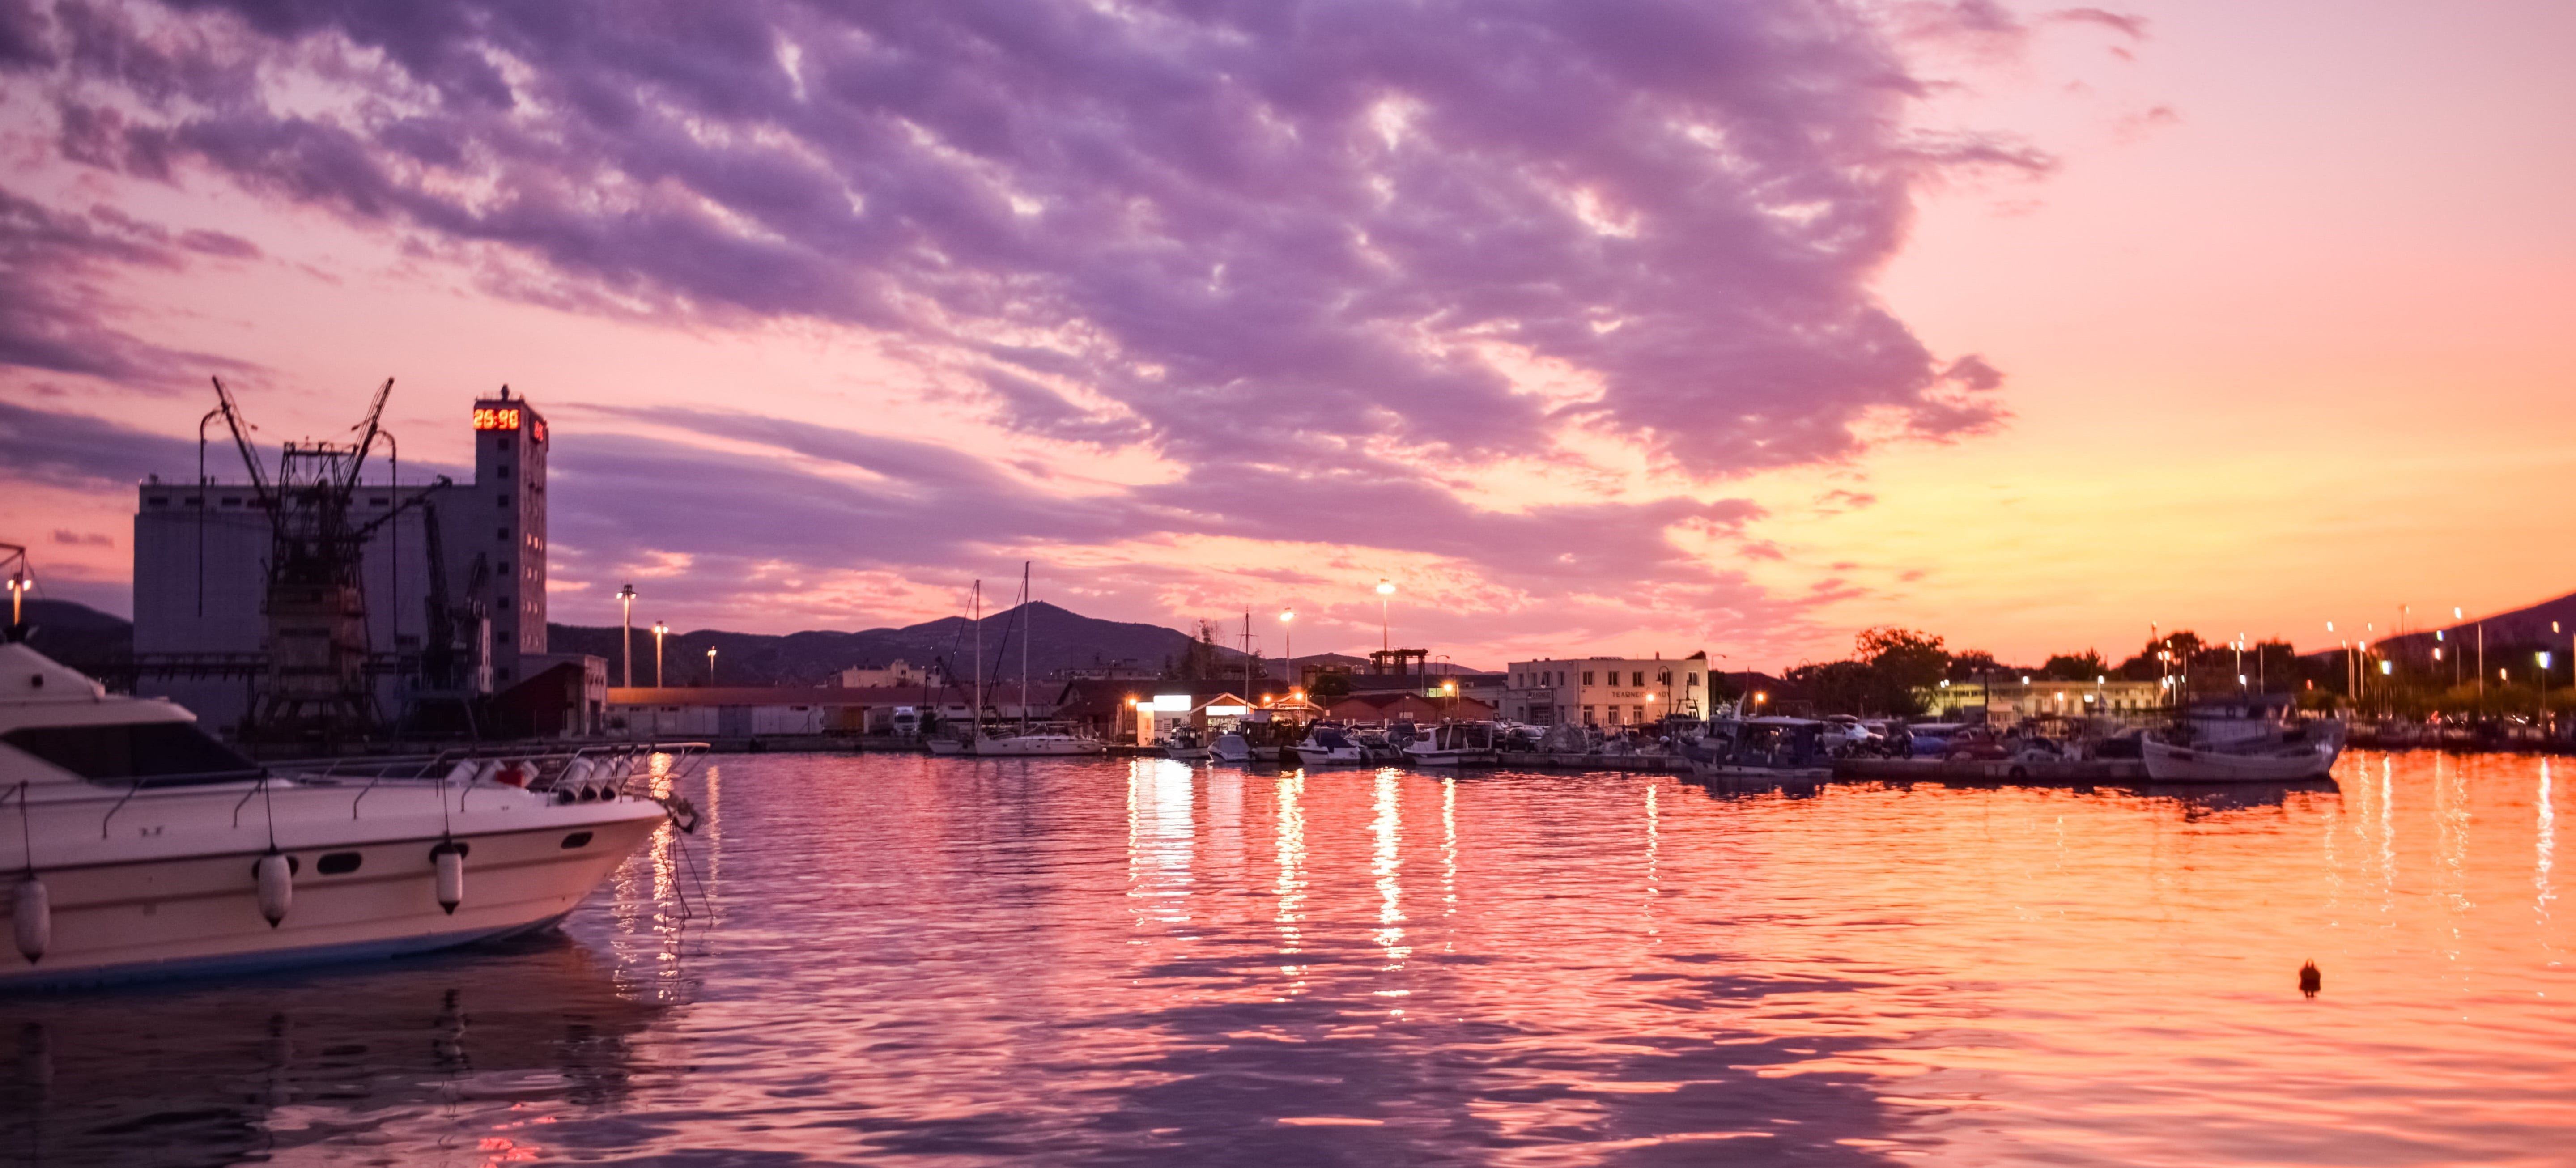 greece, volos, port, sunset, dusk, colors, town, lights, reflections